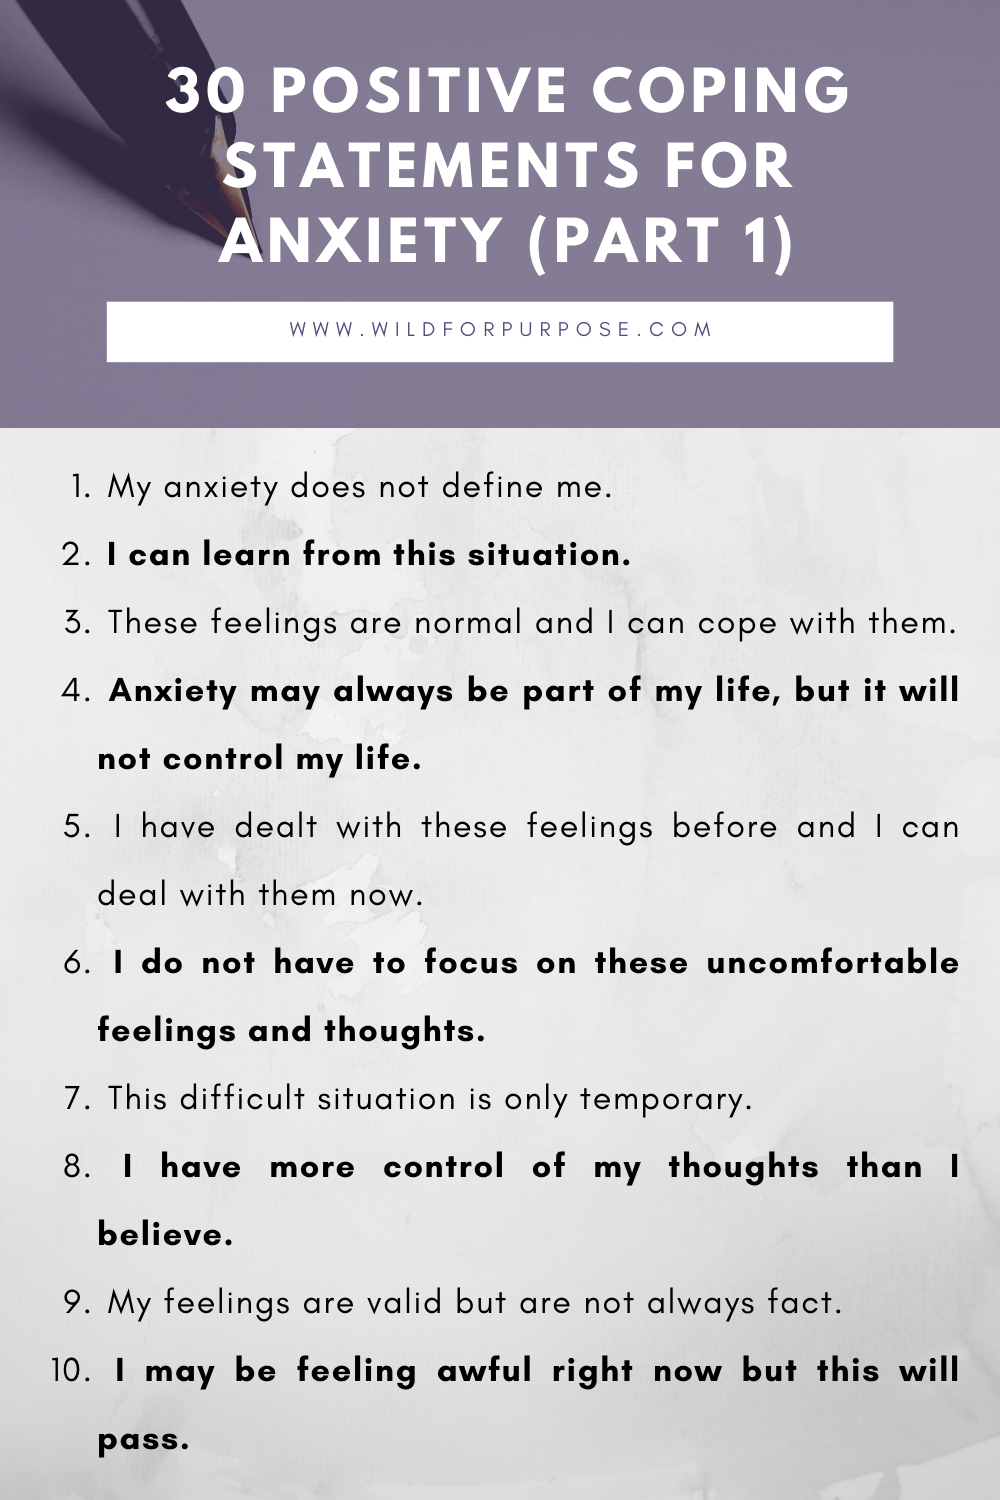 30 Positive Coping Statements For Anxiety, Image Part 1